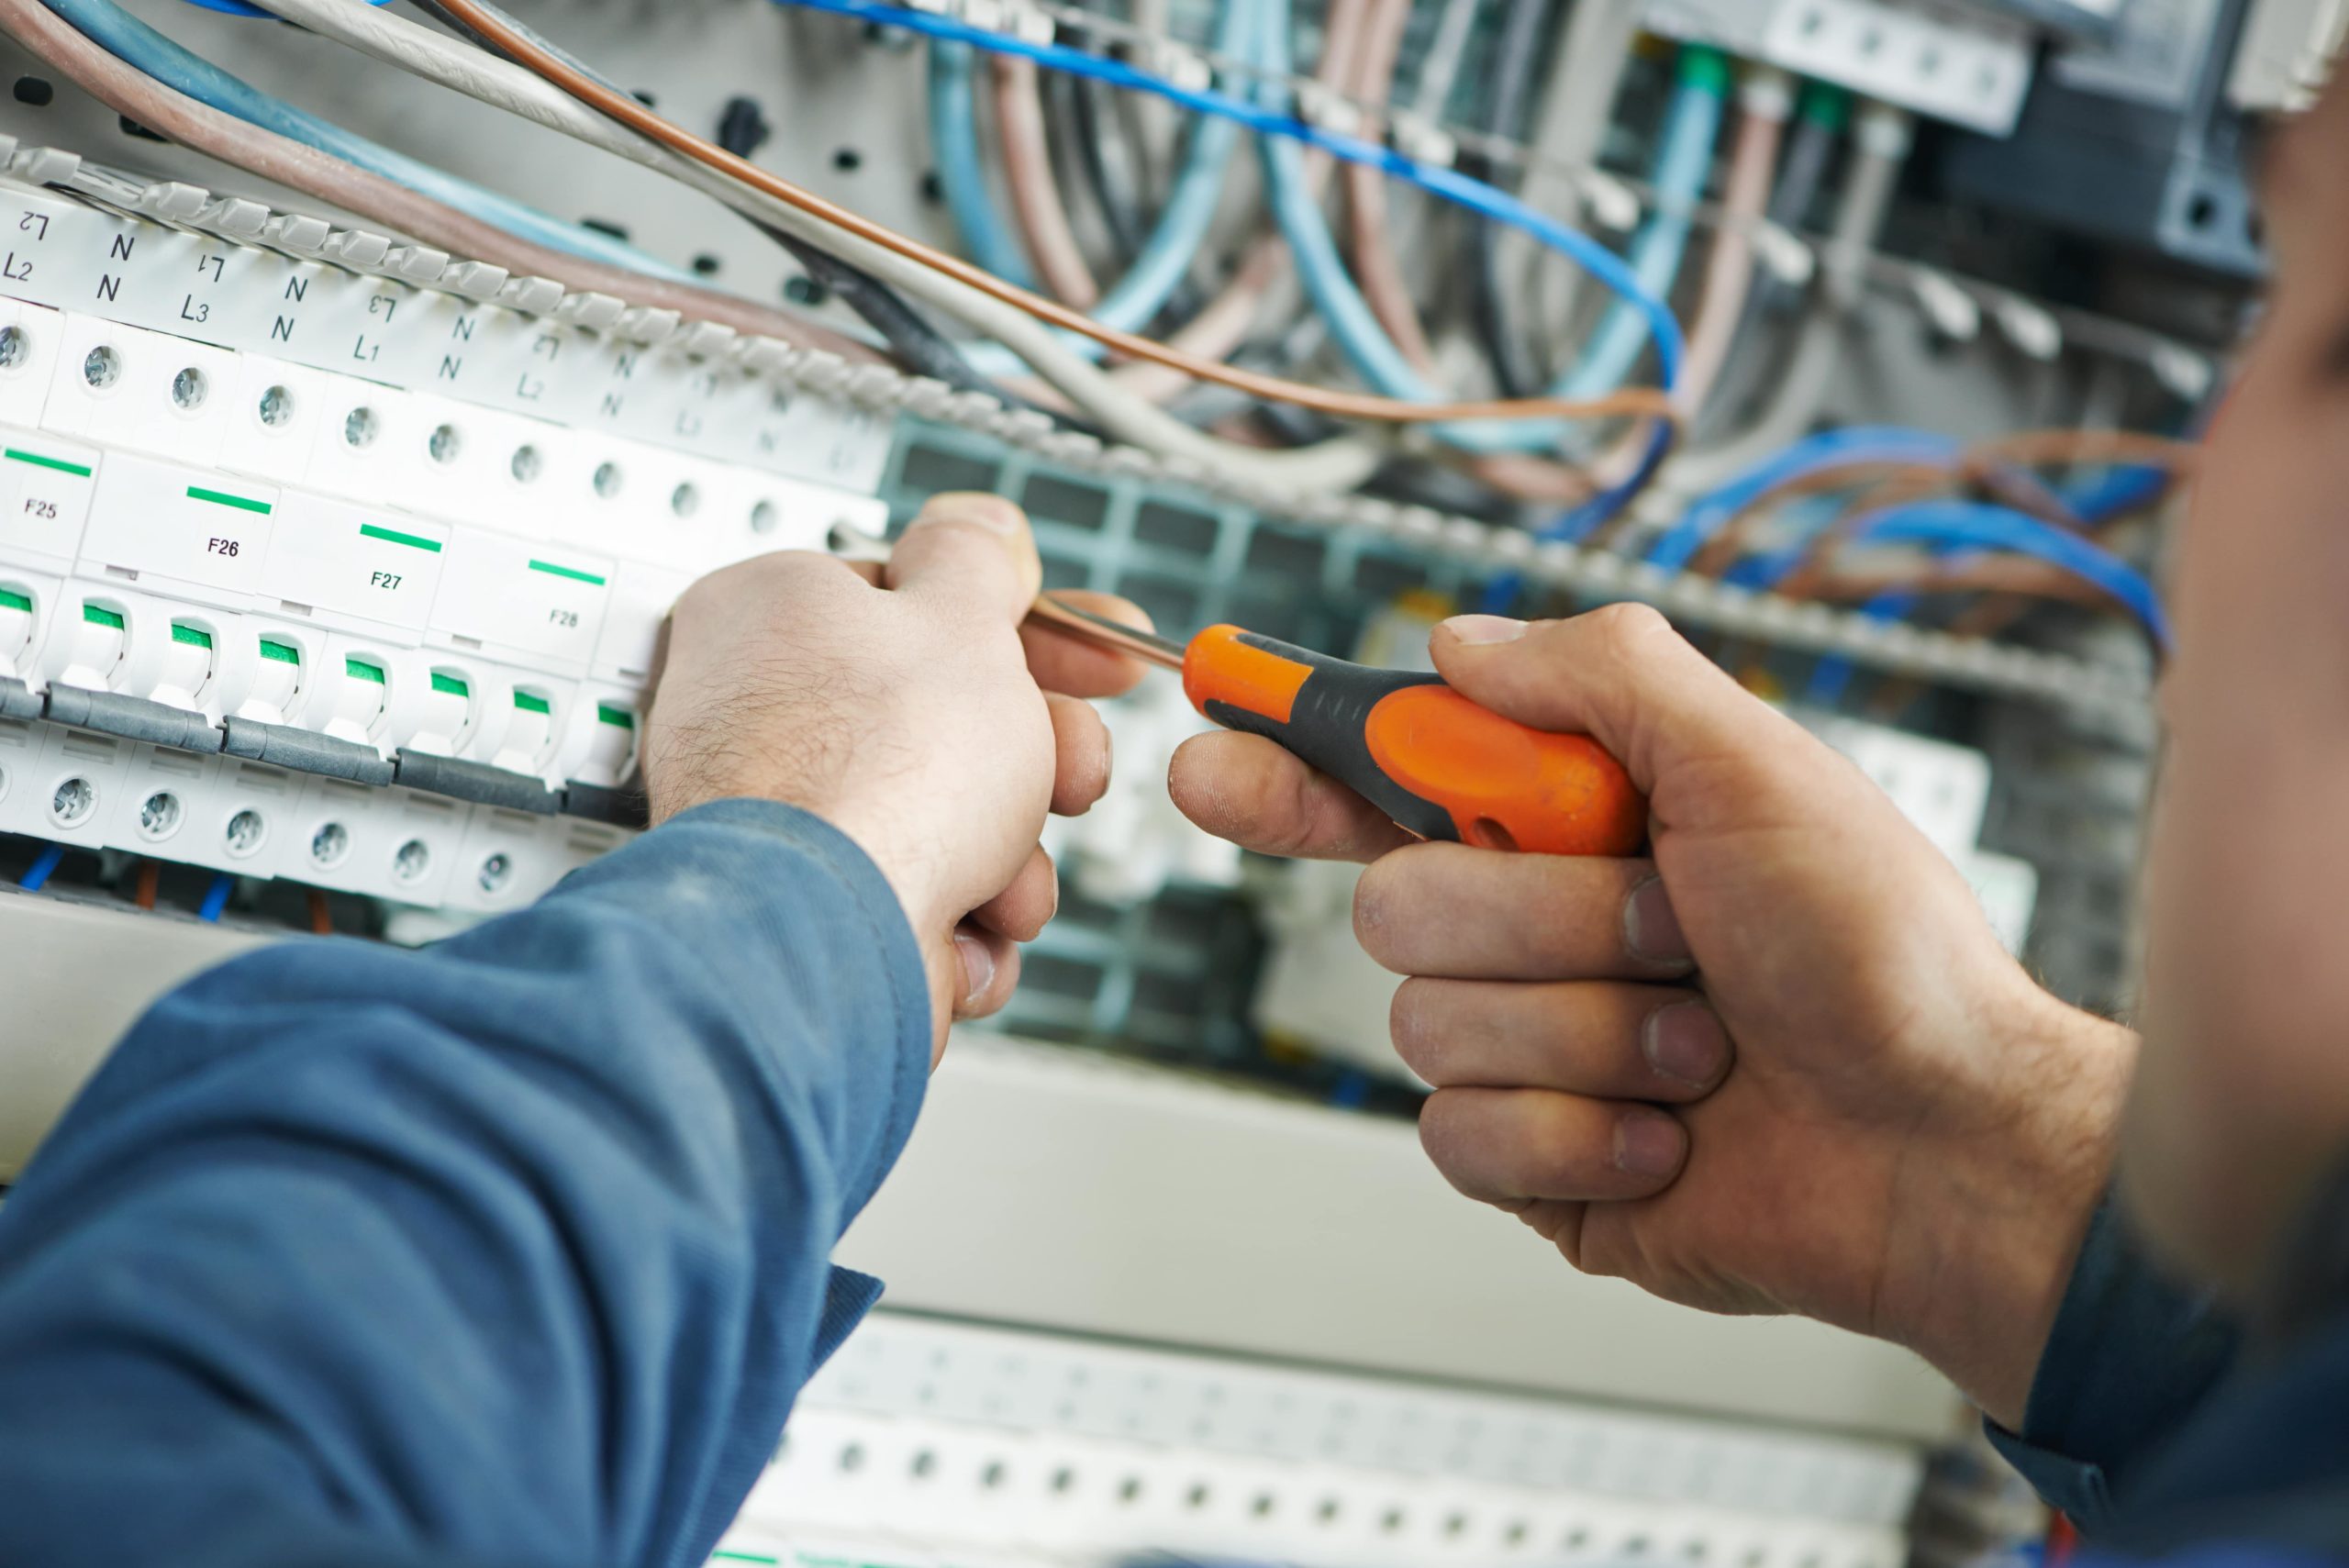 An electrician using a screwdriver to work on a electrical panel